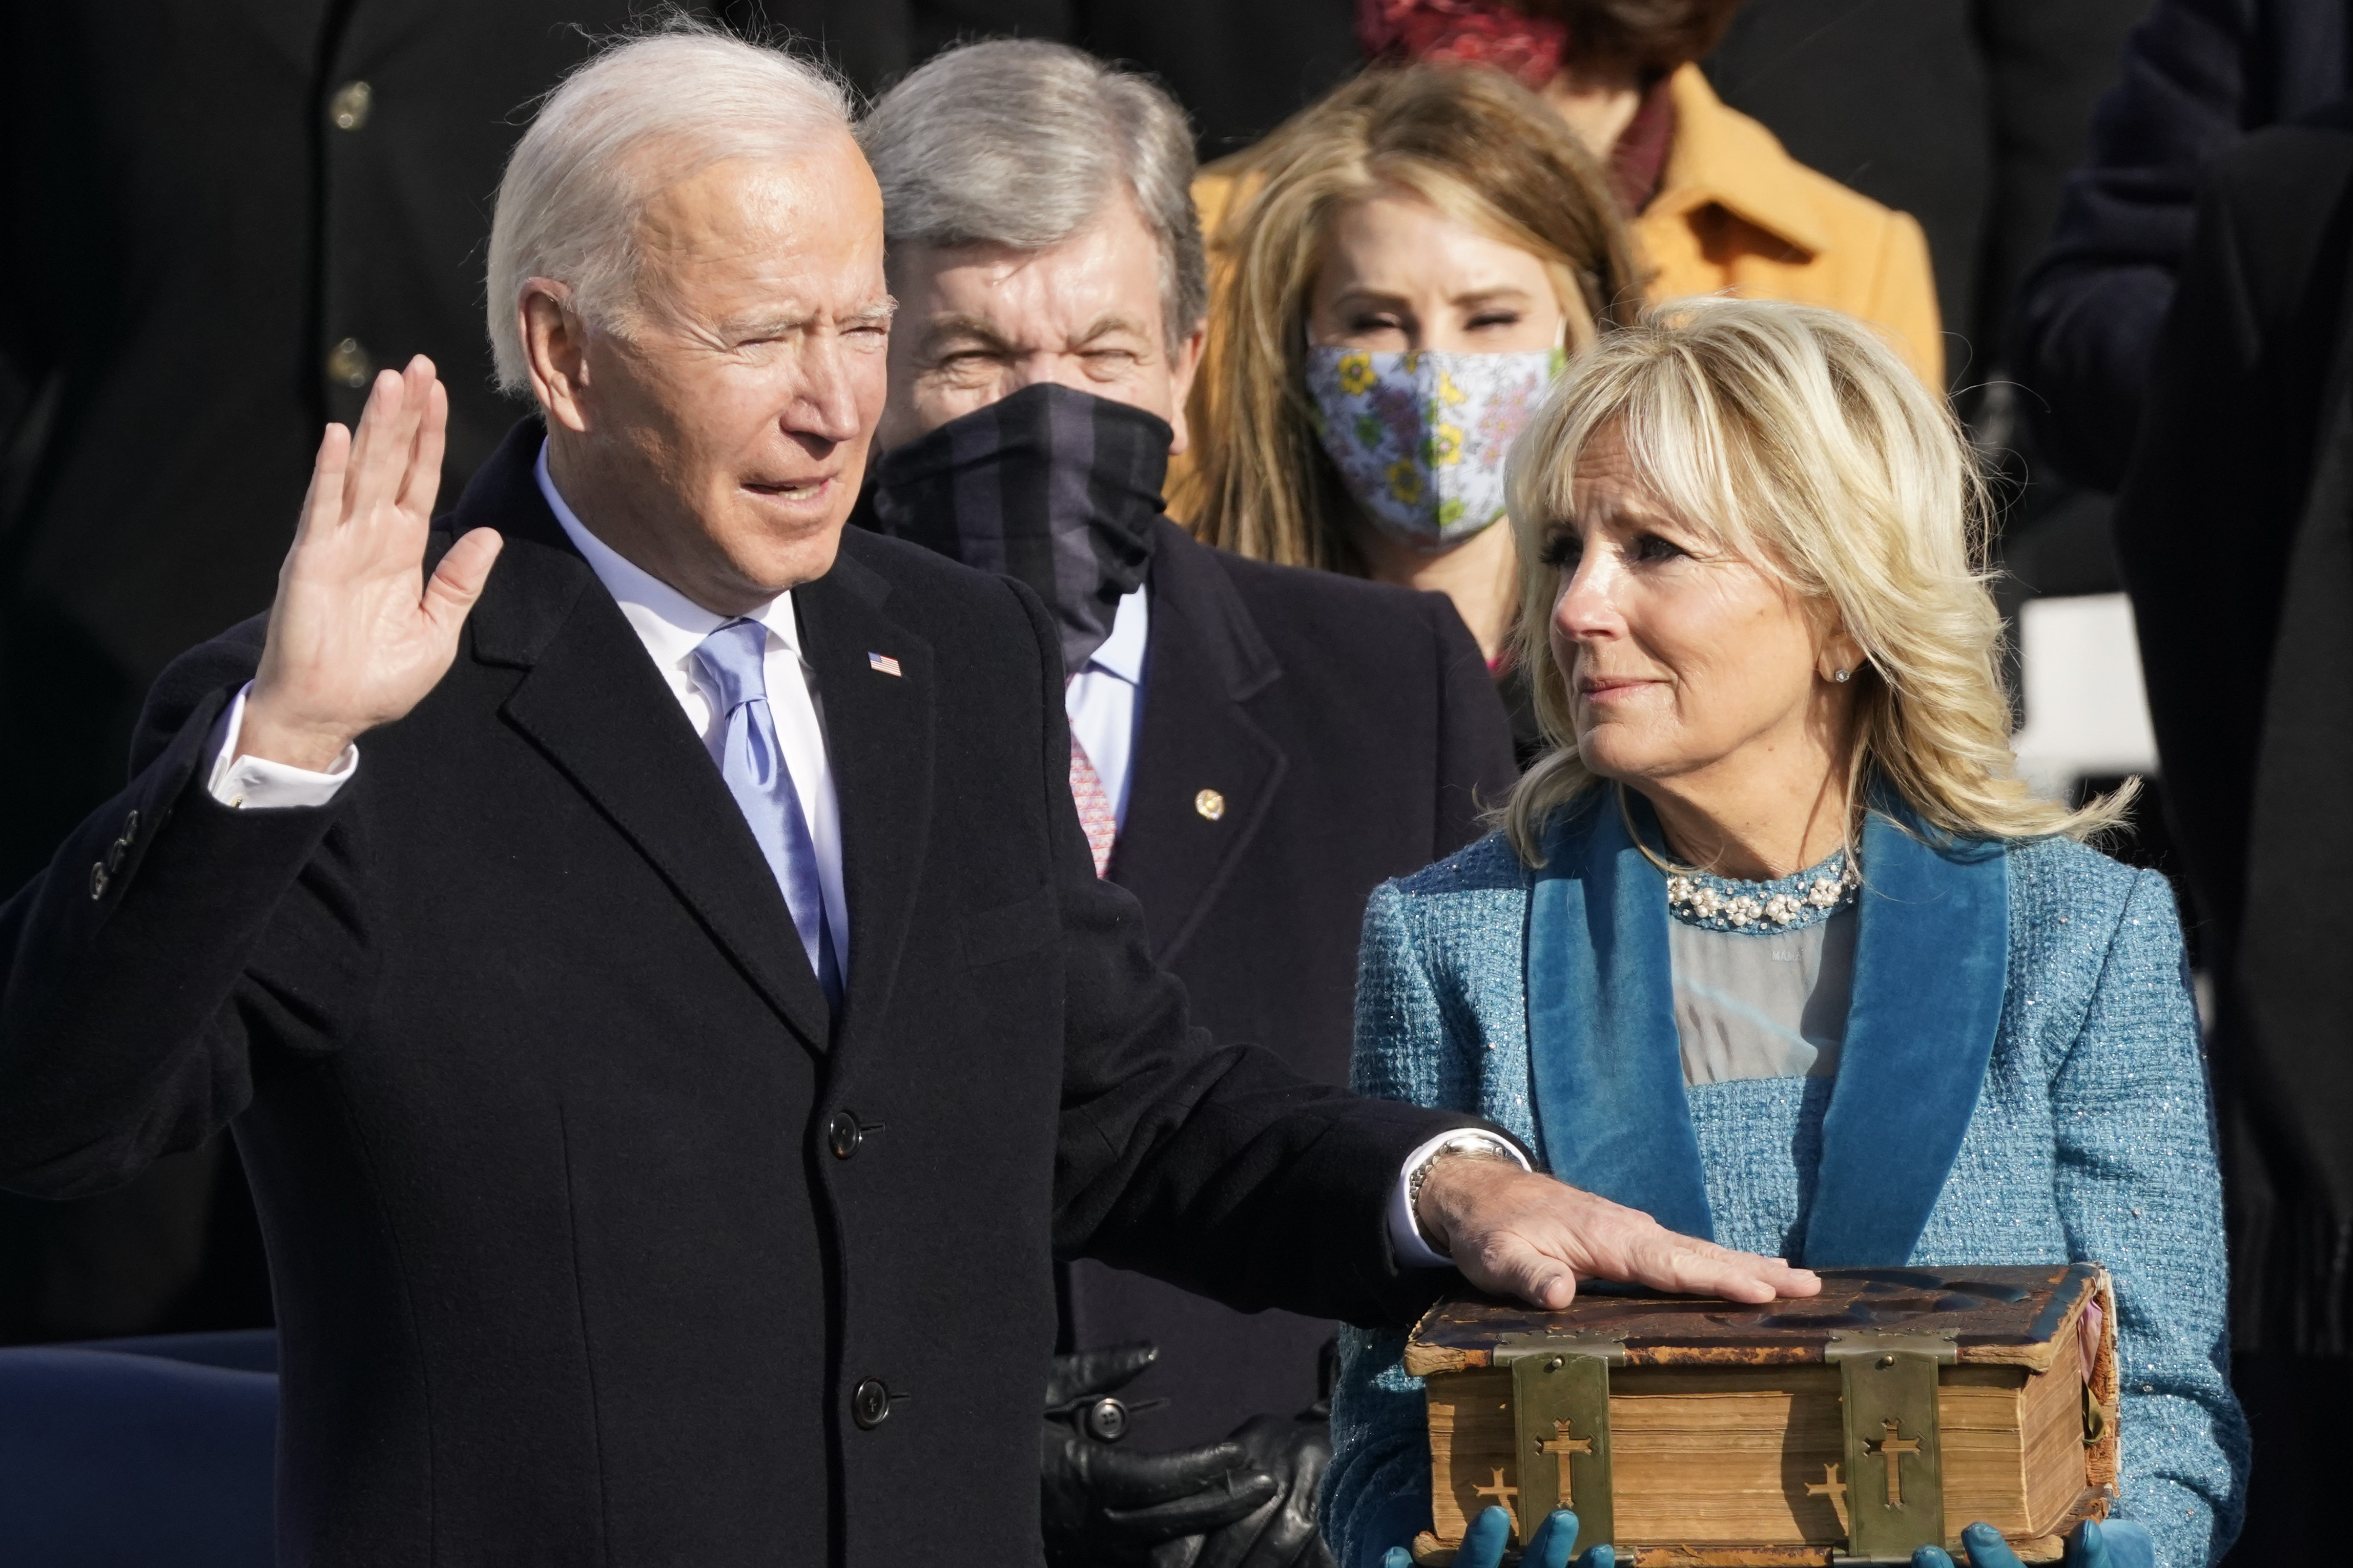 Joe Biden is sworn in as the 46th president of the United States by Chief Justice John Roberts as Jill Biden holds the Bible at the US Capitol in Washington